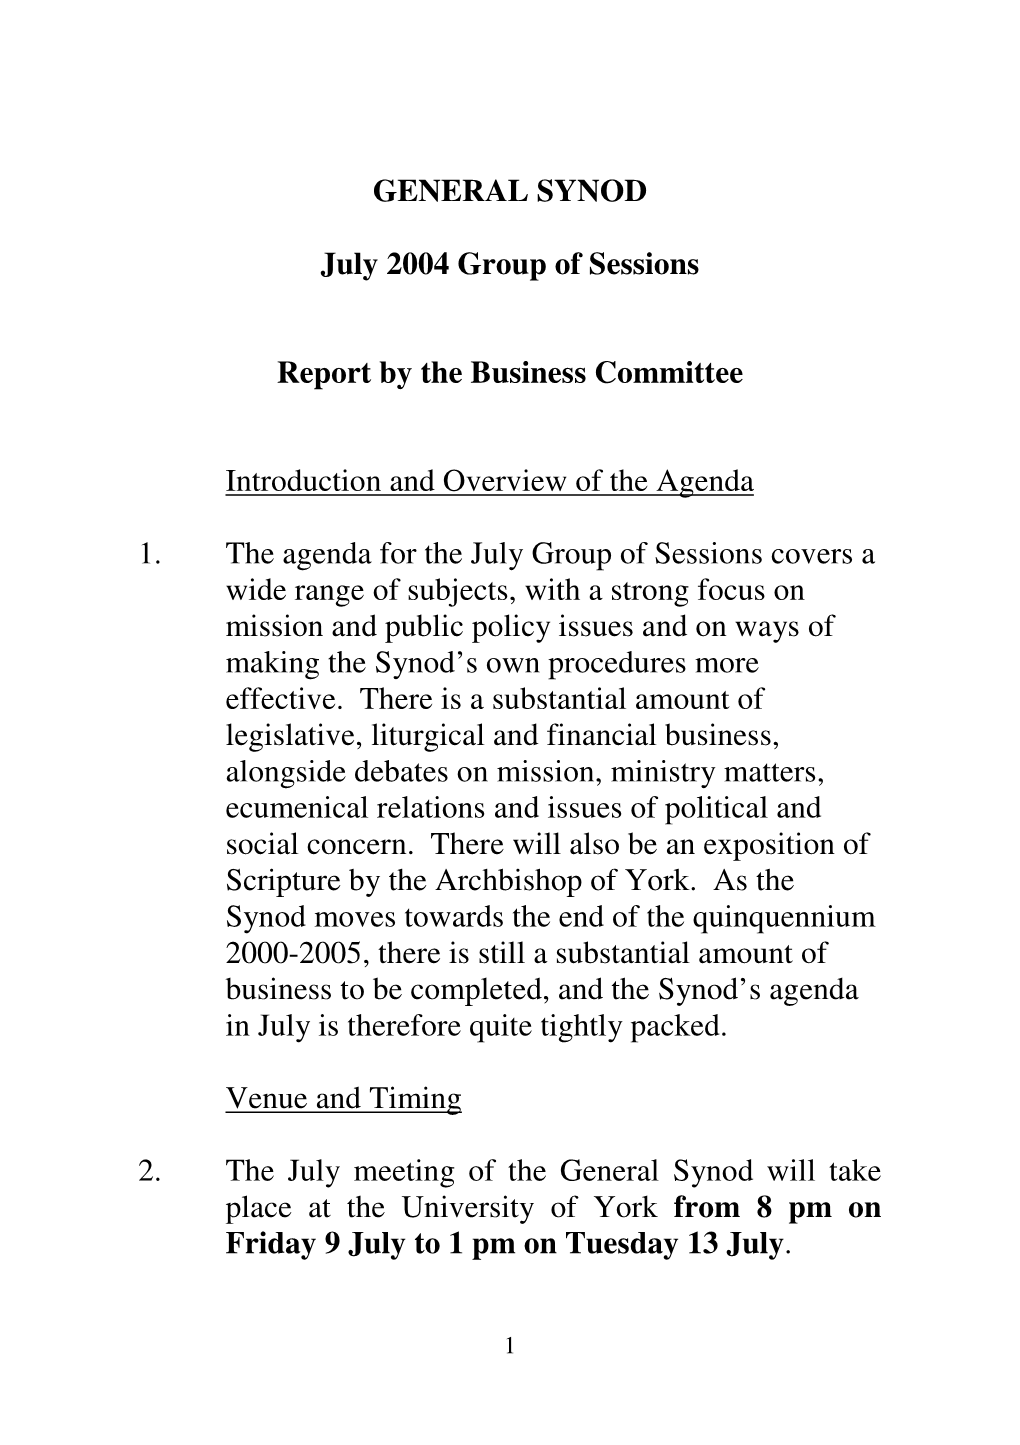 GENERAL SYNOD July 2004 Group of Sessions Report by the Business